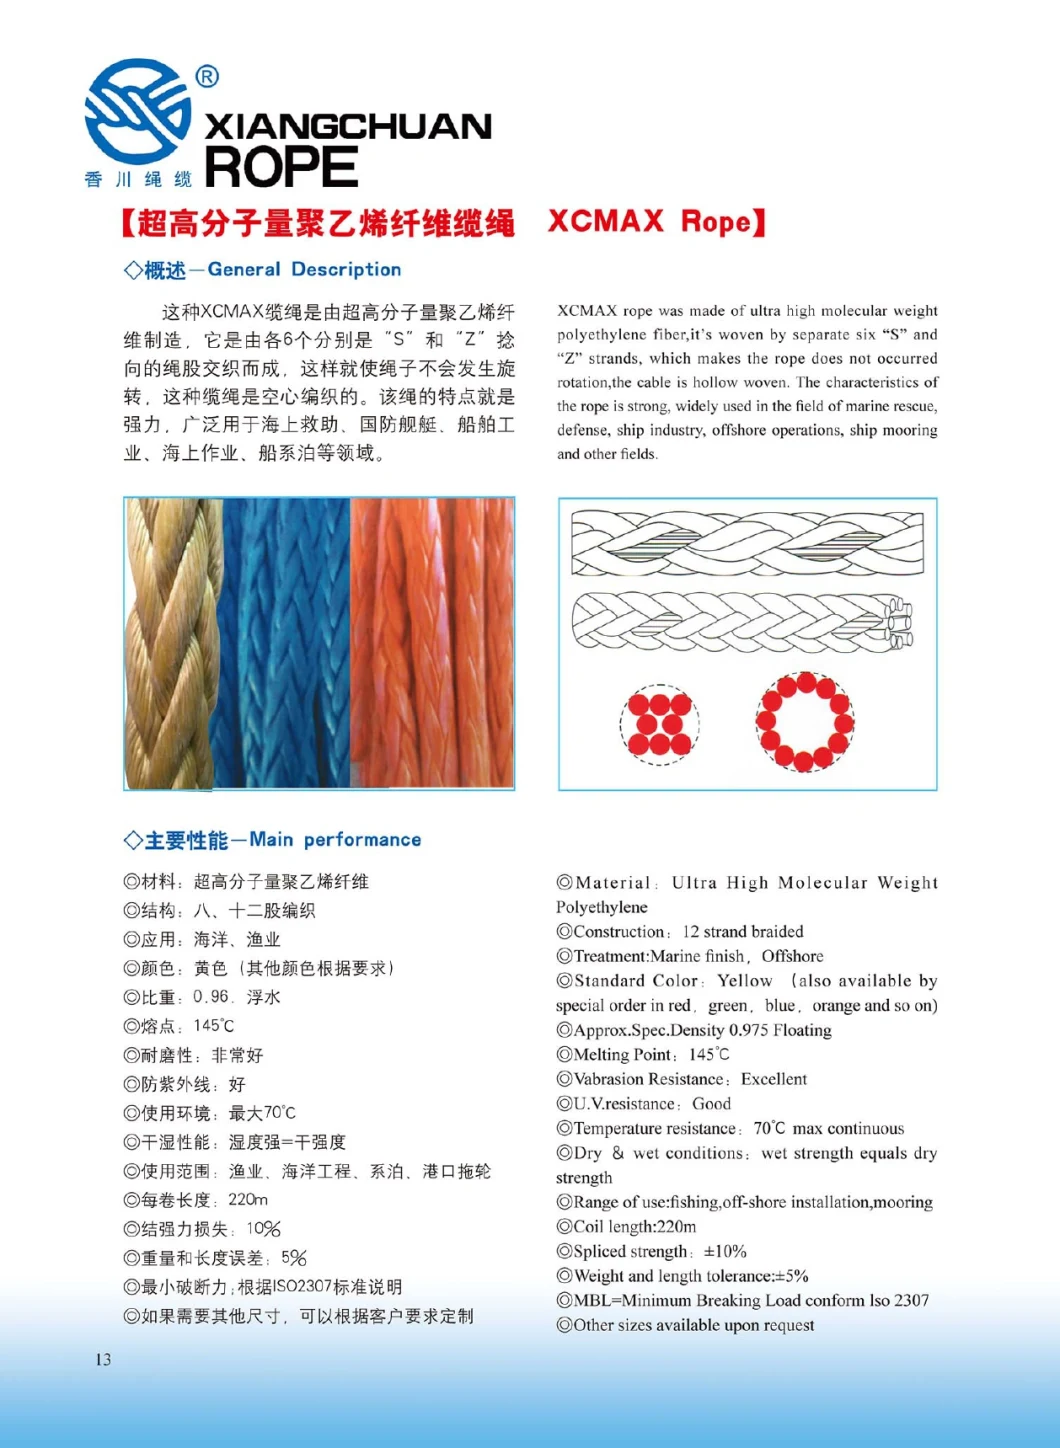 Synthetic Winch Rope with Hook Car Tow Recovery Cable with High Quality Synthetic Winch Rope